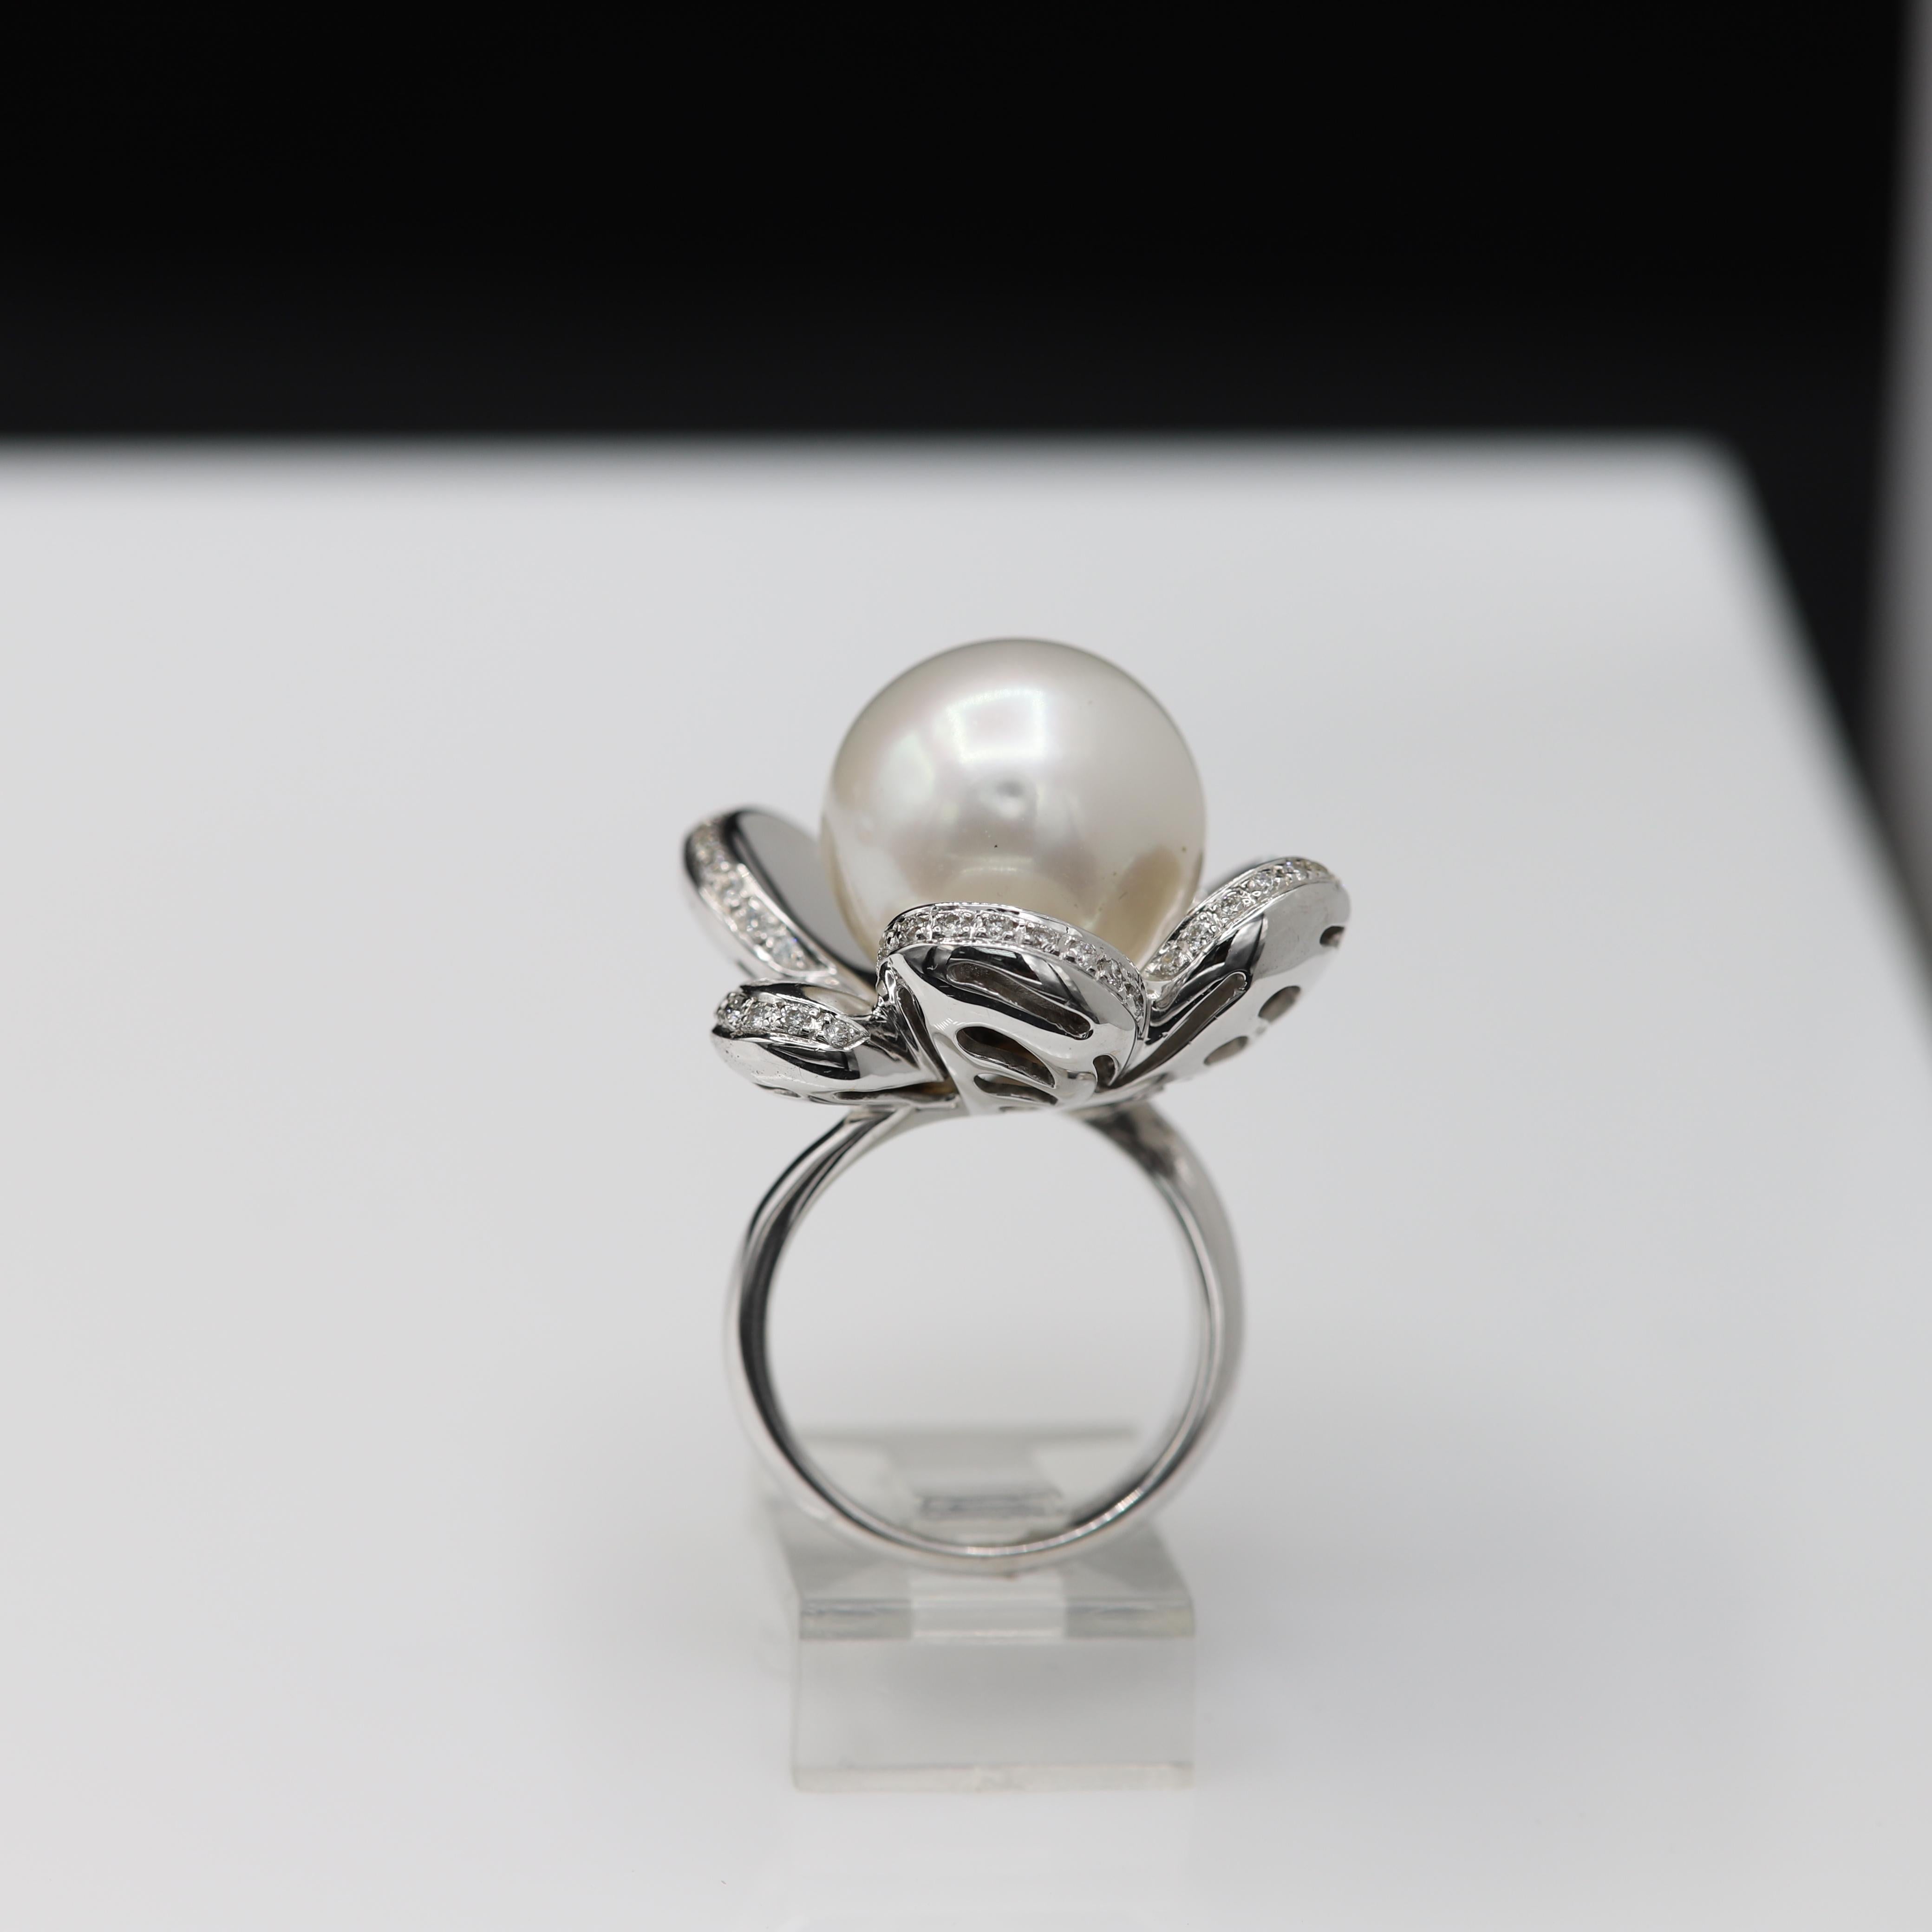 Round Cut South Sea Pearl Flower Gold Ring 18 Karat White Gold & Diamonds Pearl For Sale